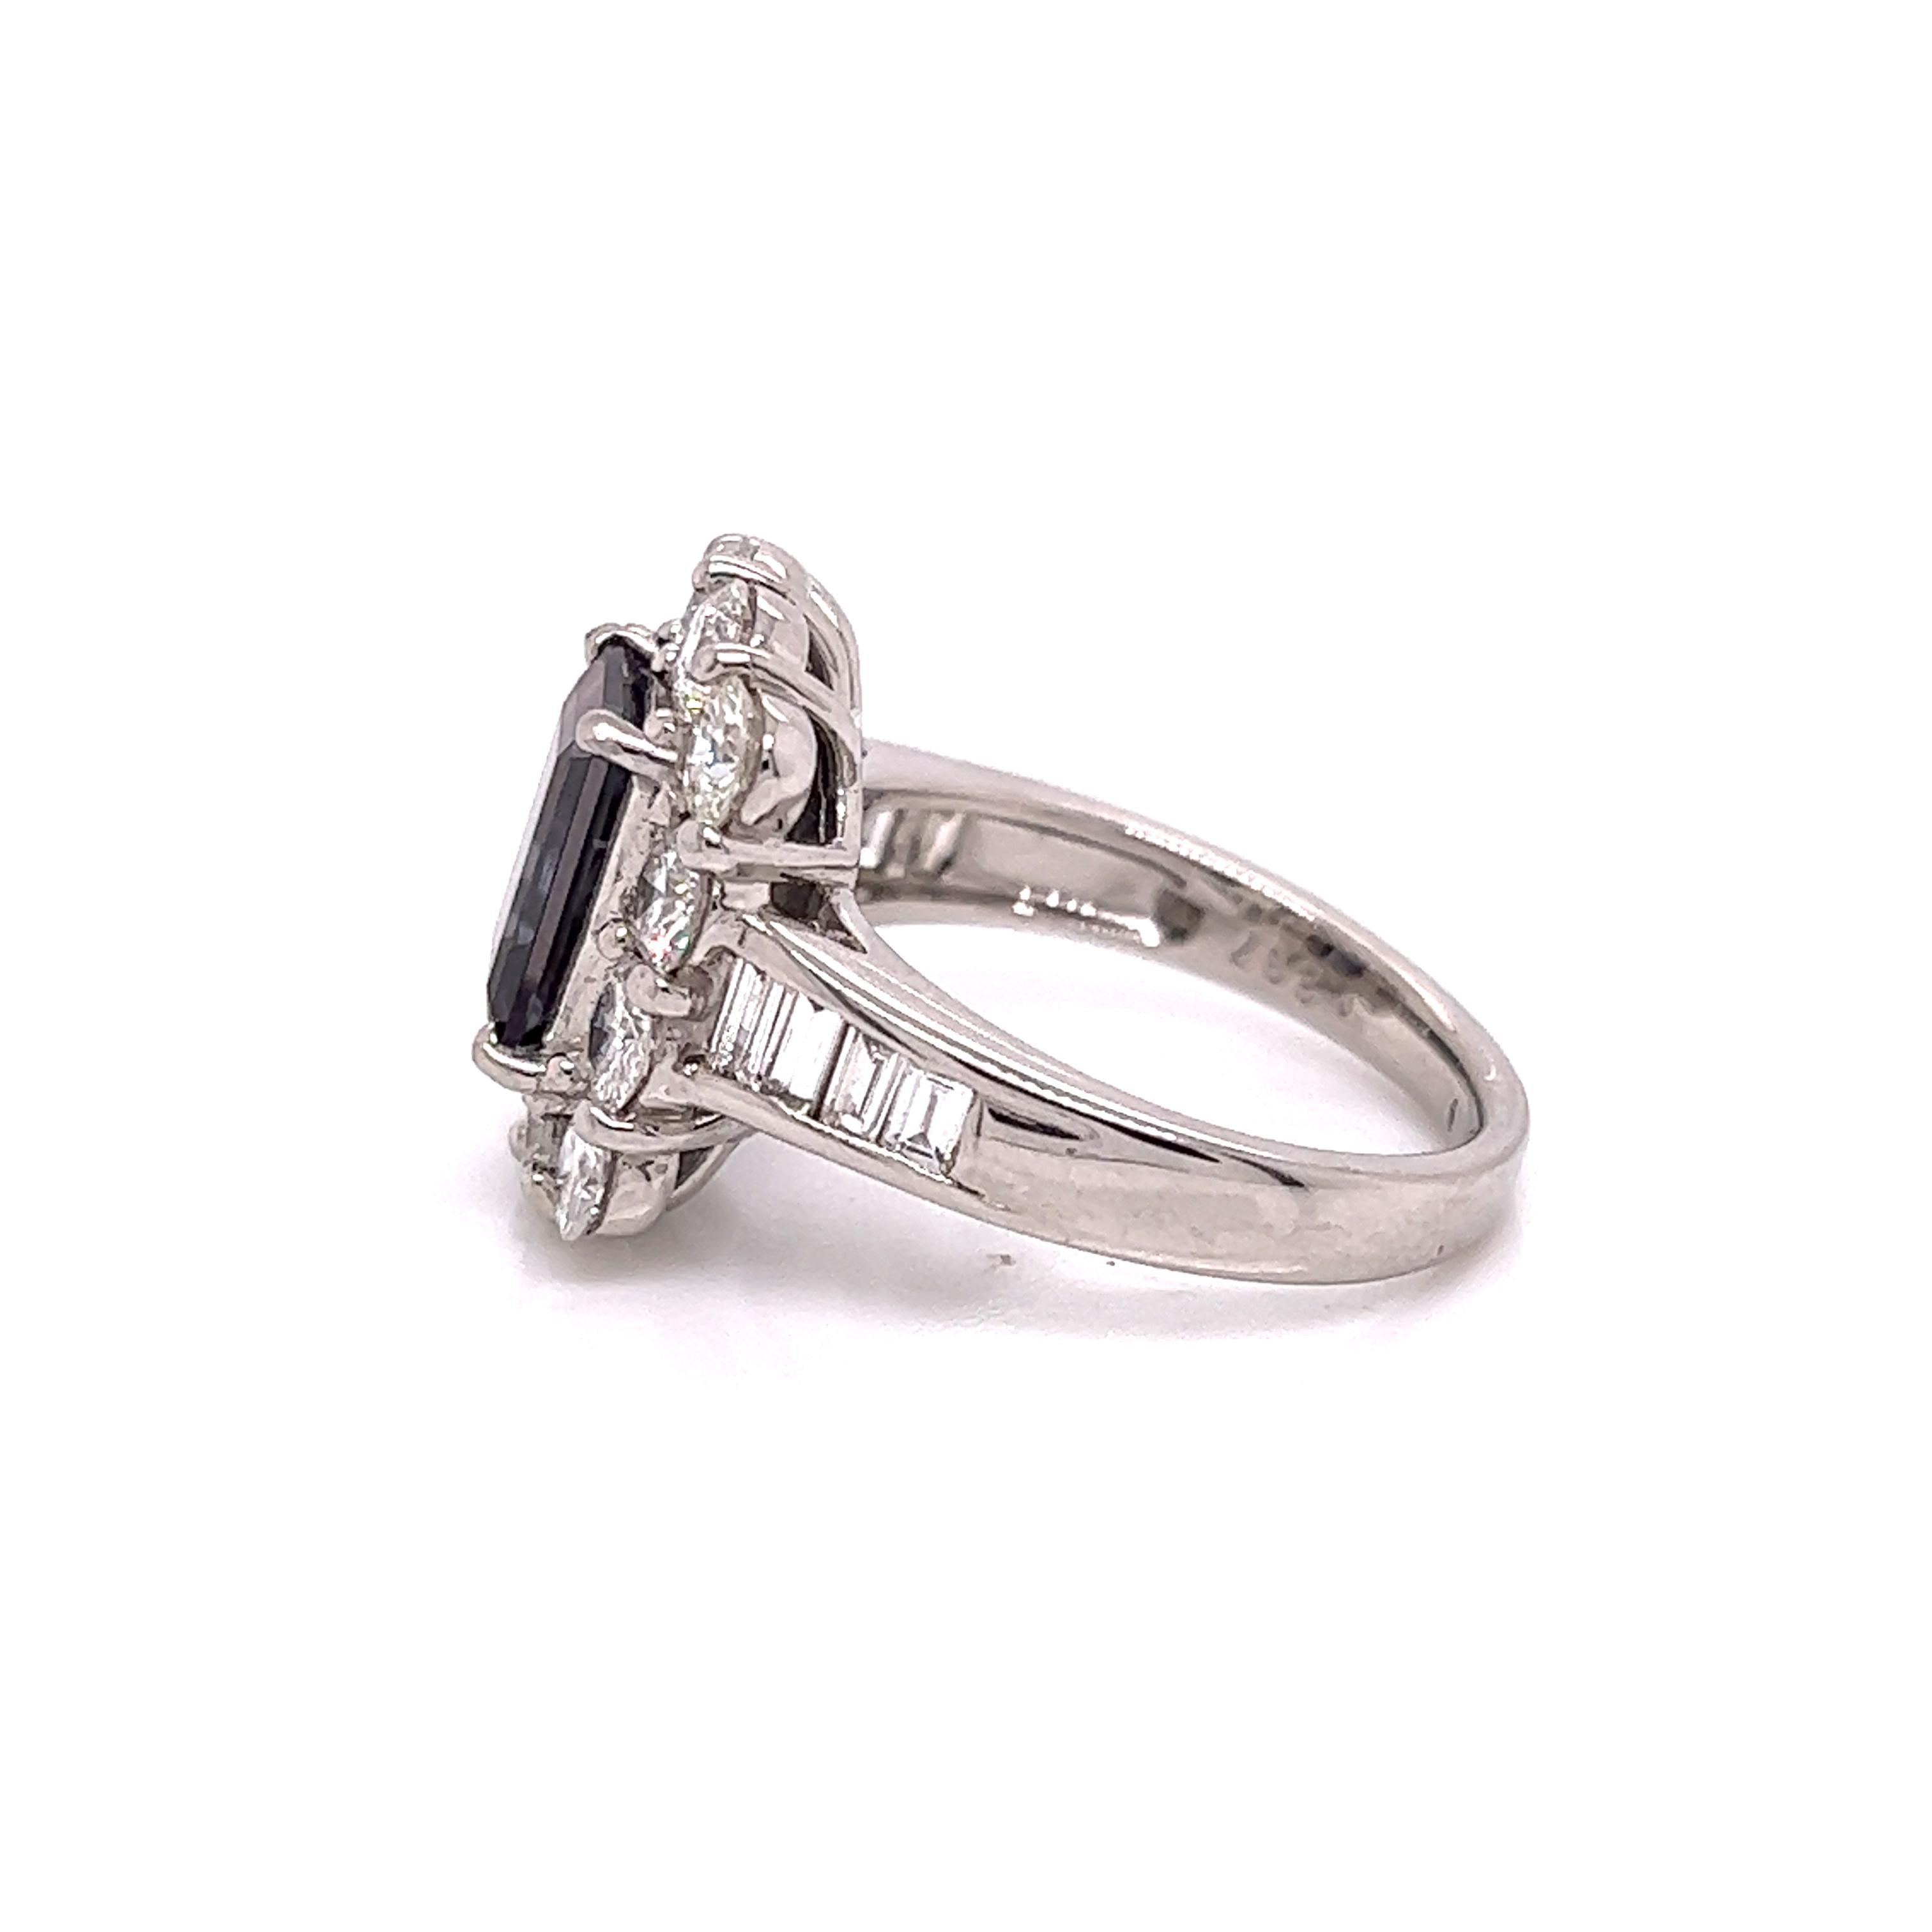 Emerald Cut Natural GIA Certified 2.57Ct. Brazillian Alexandrite Diamond Vintage Ring For Sale